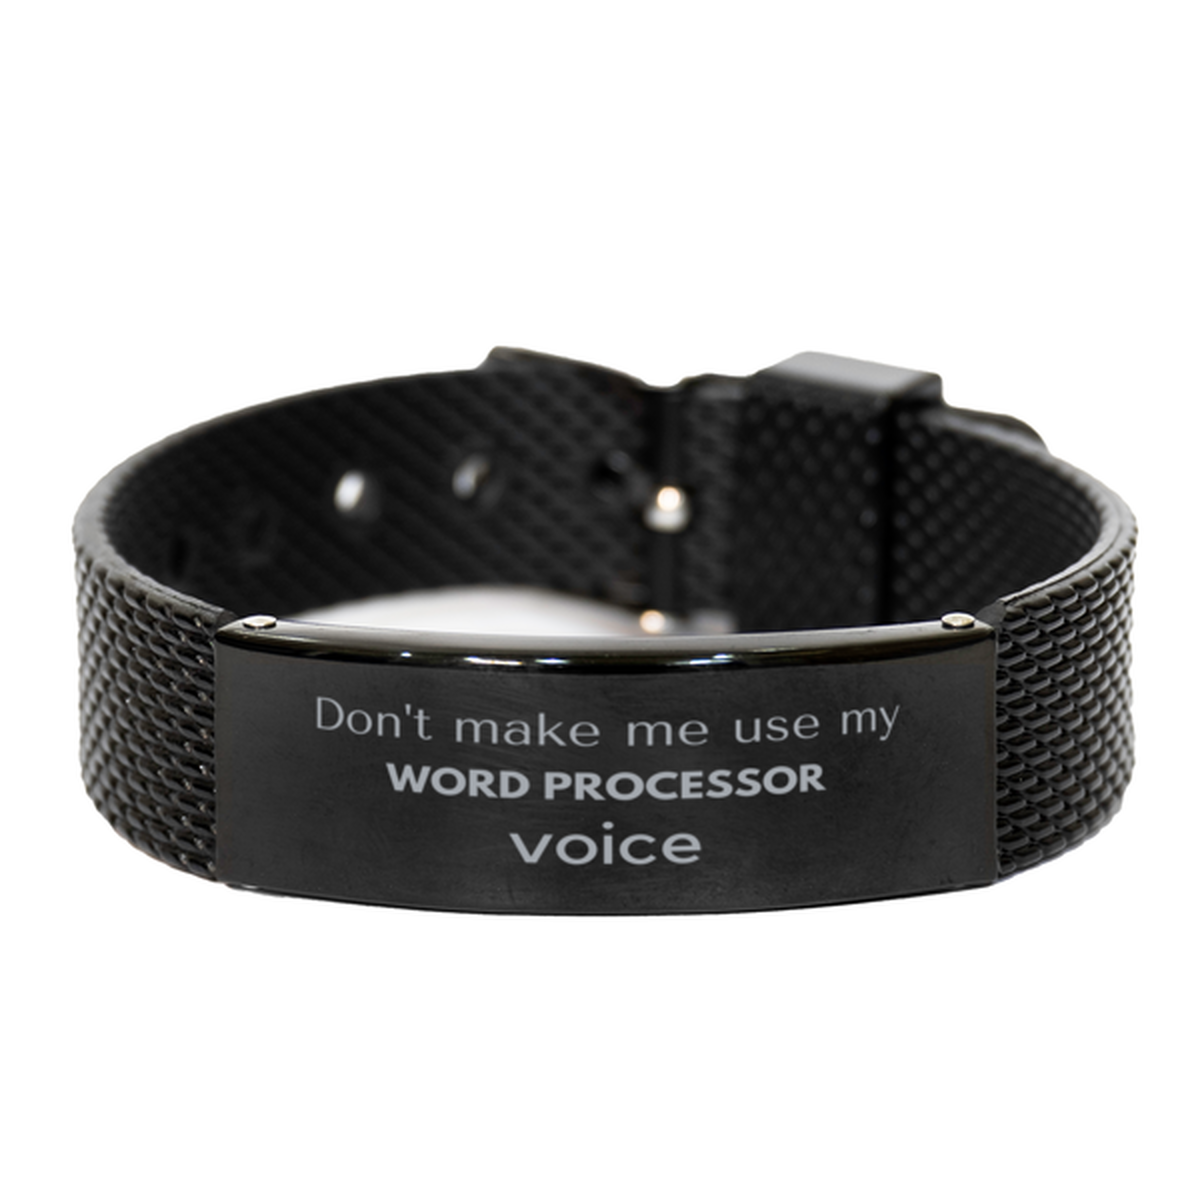 Don't make me use my Word Processor voice, Sarcasm Word Processor Gifts, Christmas Word Processor Black Shark Mesh Bracelet Birthday Unique Gifts For Word Processor Coworkers, Men, Women, Colleague, Friends